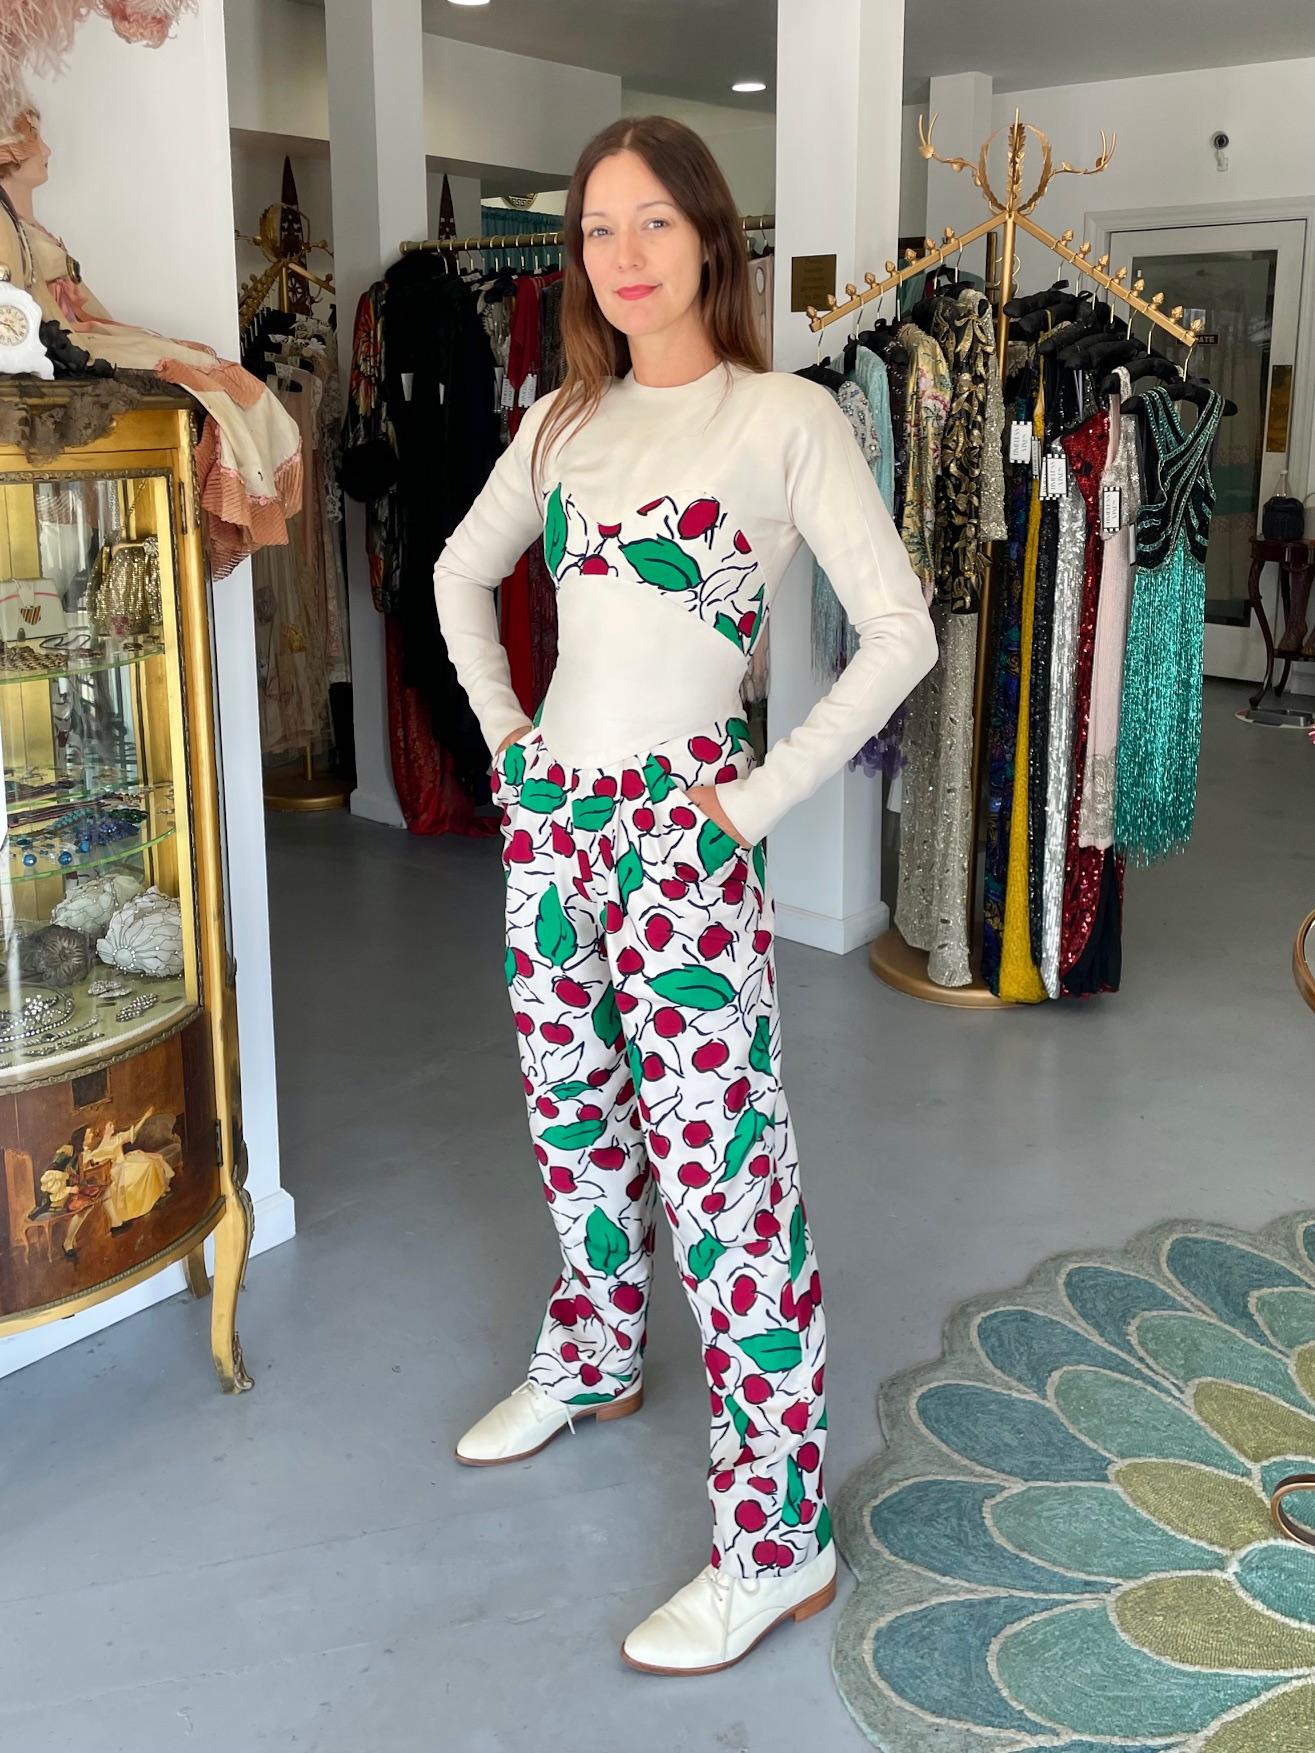 An incredibly chic and hard-to-find Geoffrey Beene cherry print silk crepe jumpsuit  dating back to the early 1990's. Geoffrey Beene's body-contoured designs were marvels of cut and proportion. There is an exhibition of his work currently running